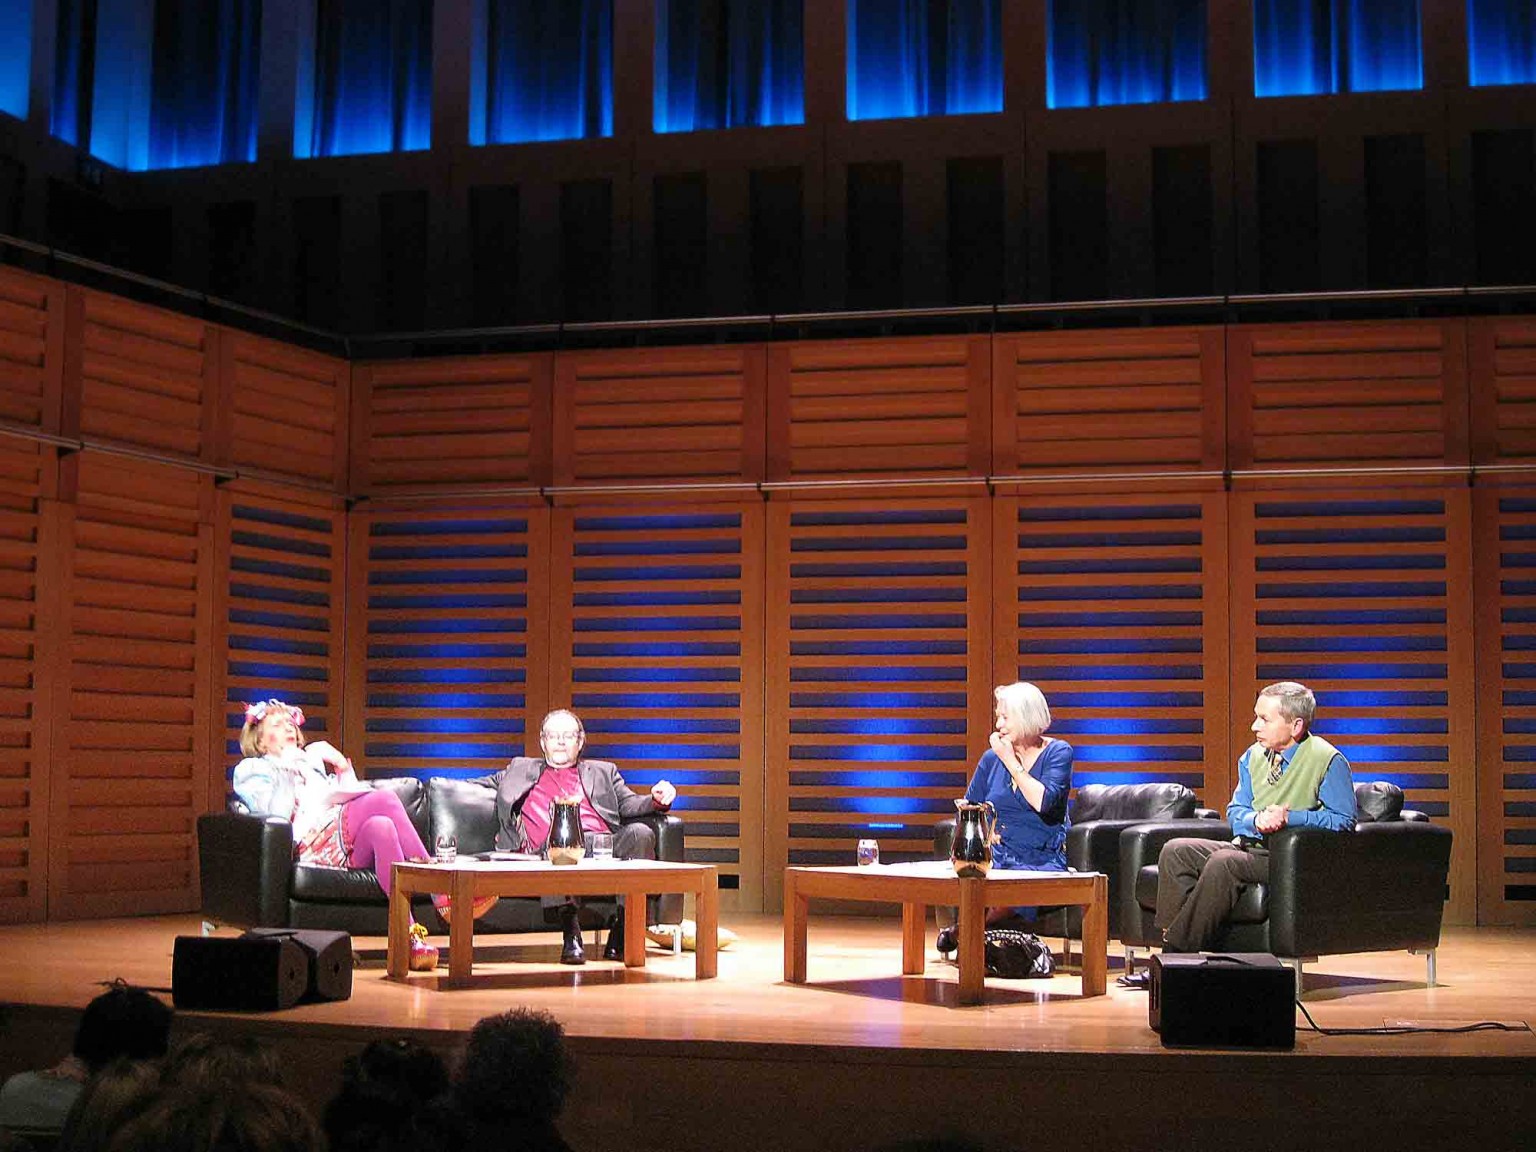 Left to right: Grayson Perry (dressed as Claire), Rt Rev James Jones, Kate Adie and Professor Frank Furedi.